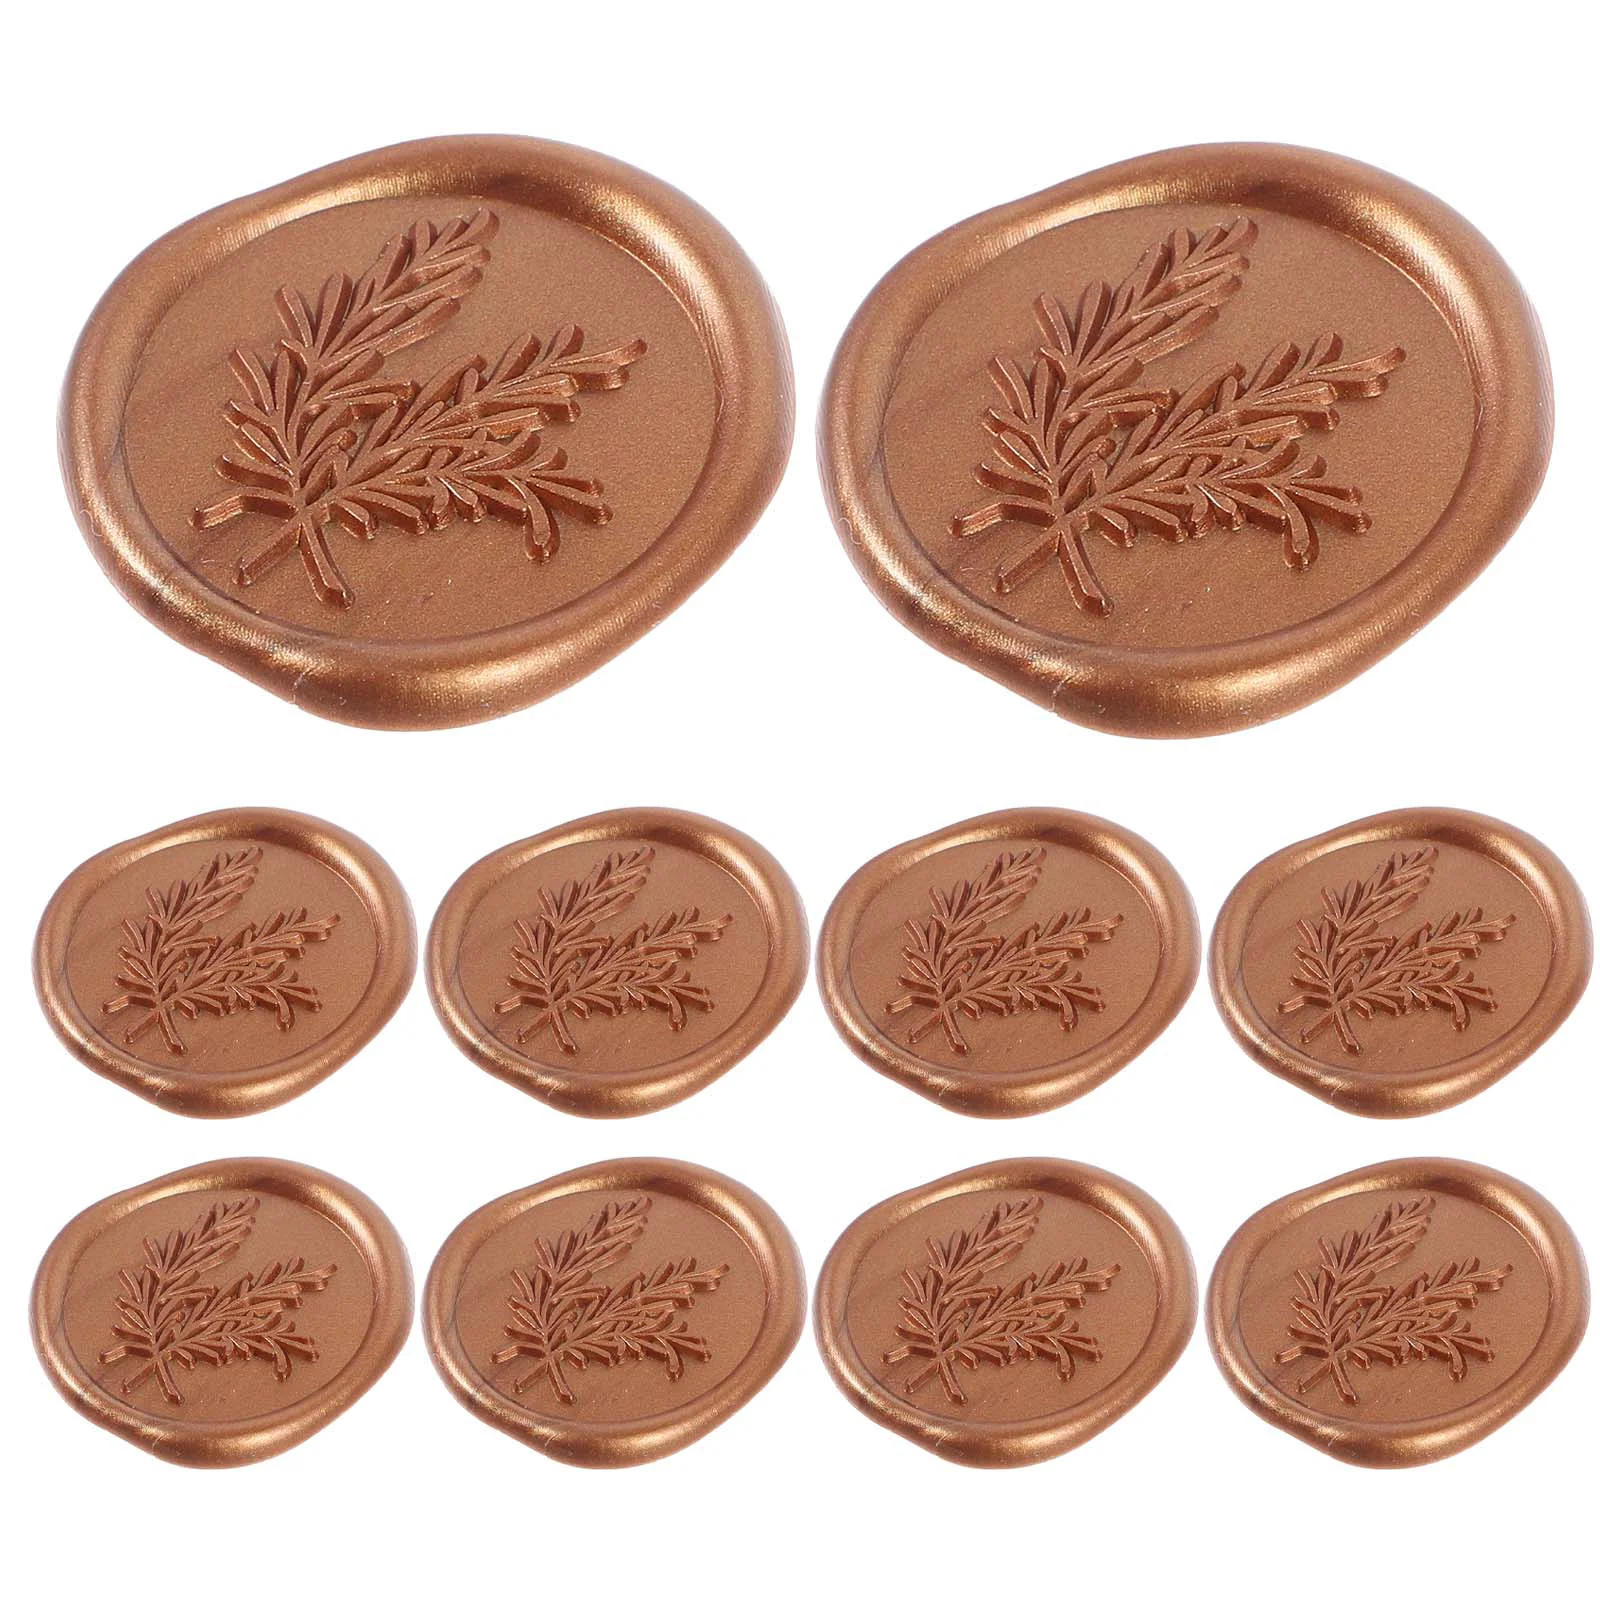 

10 Pcs Wax Seal Stickers Wedding Tag Small Envelope Invitations Seals Stamp Lacquer Envelopes